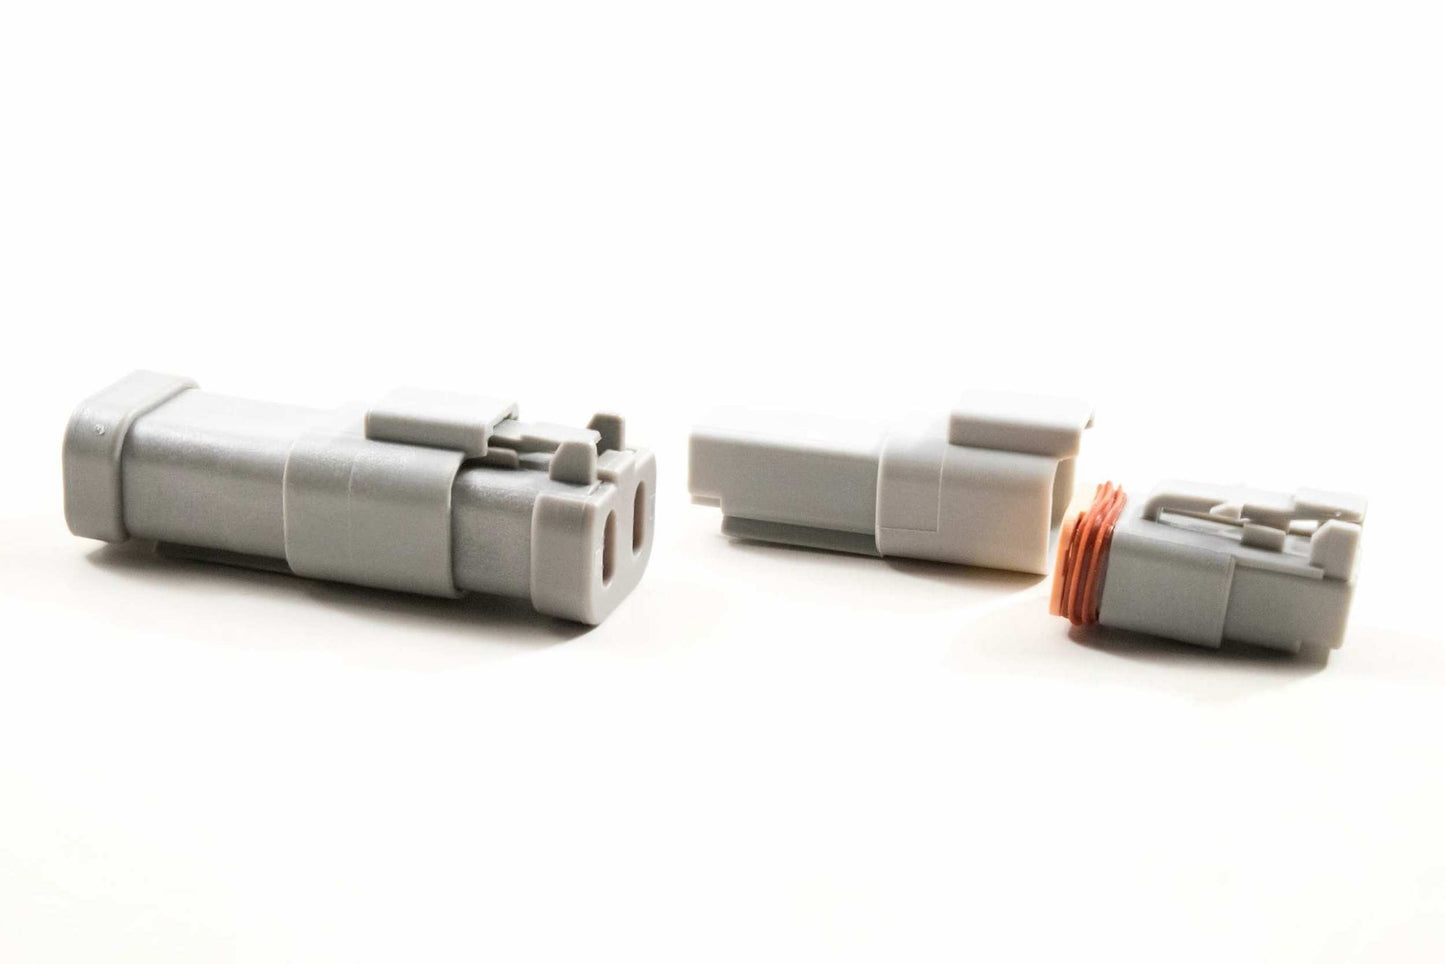 Connector: DT Female - 2 pin